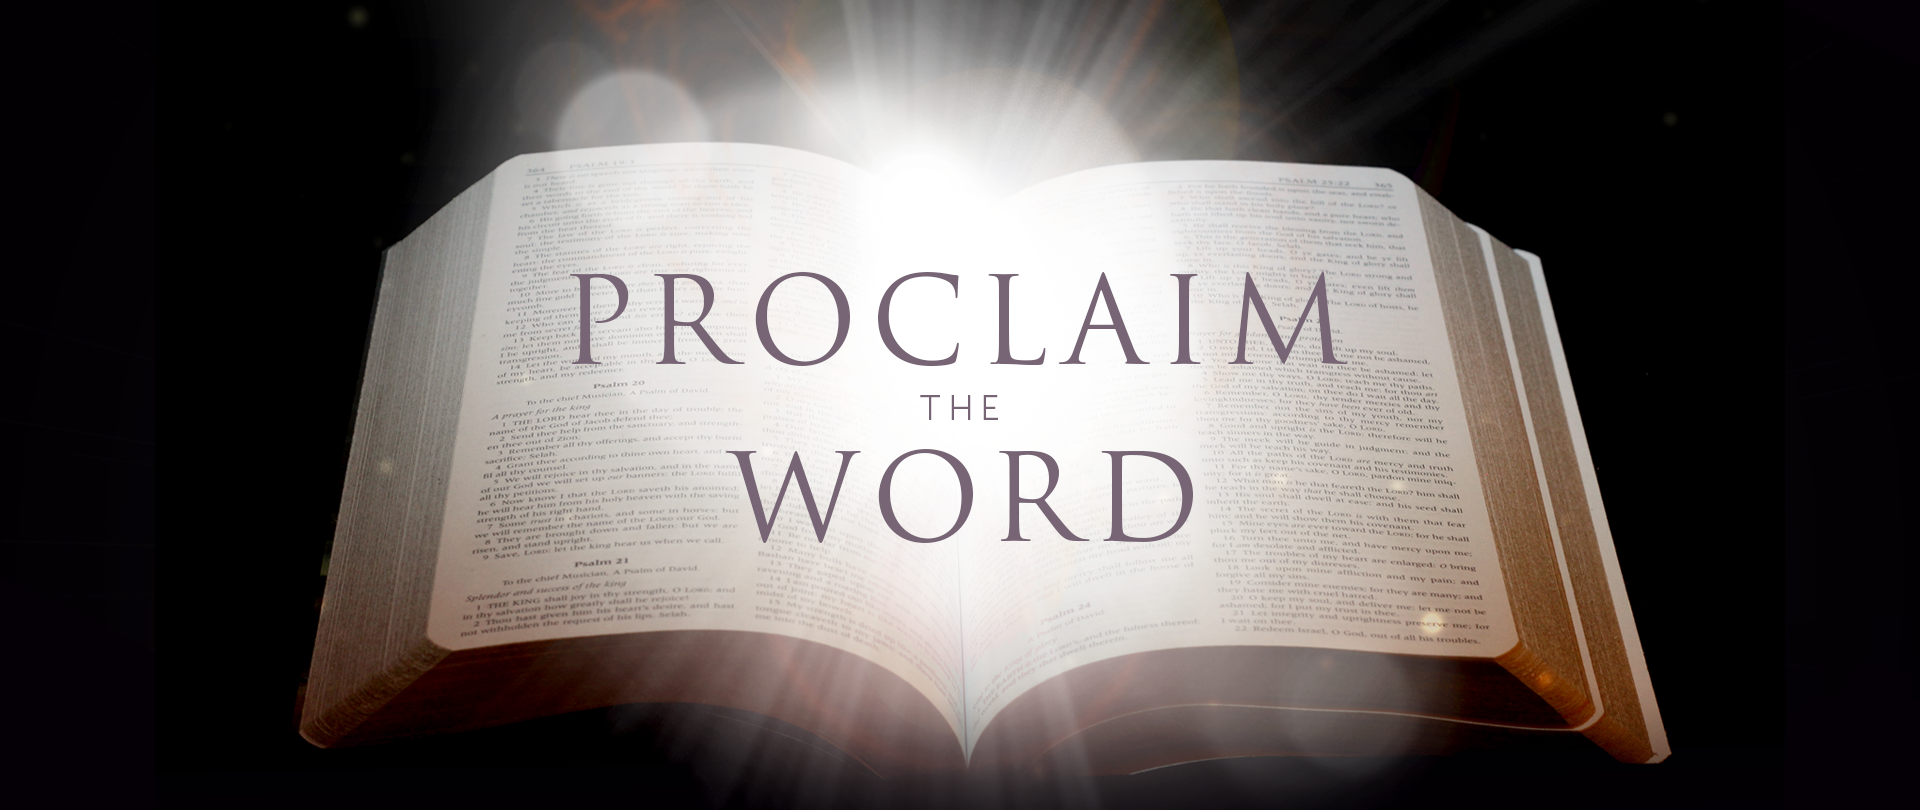 Missions Conference 2024
"Proclaim the Word"
February 24 – March 3
